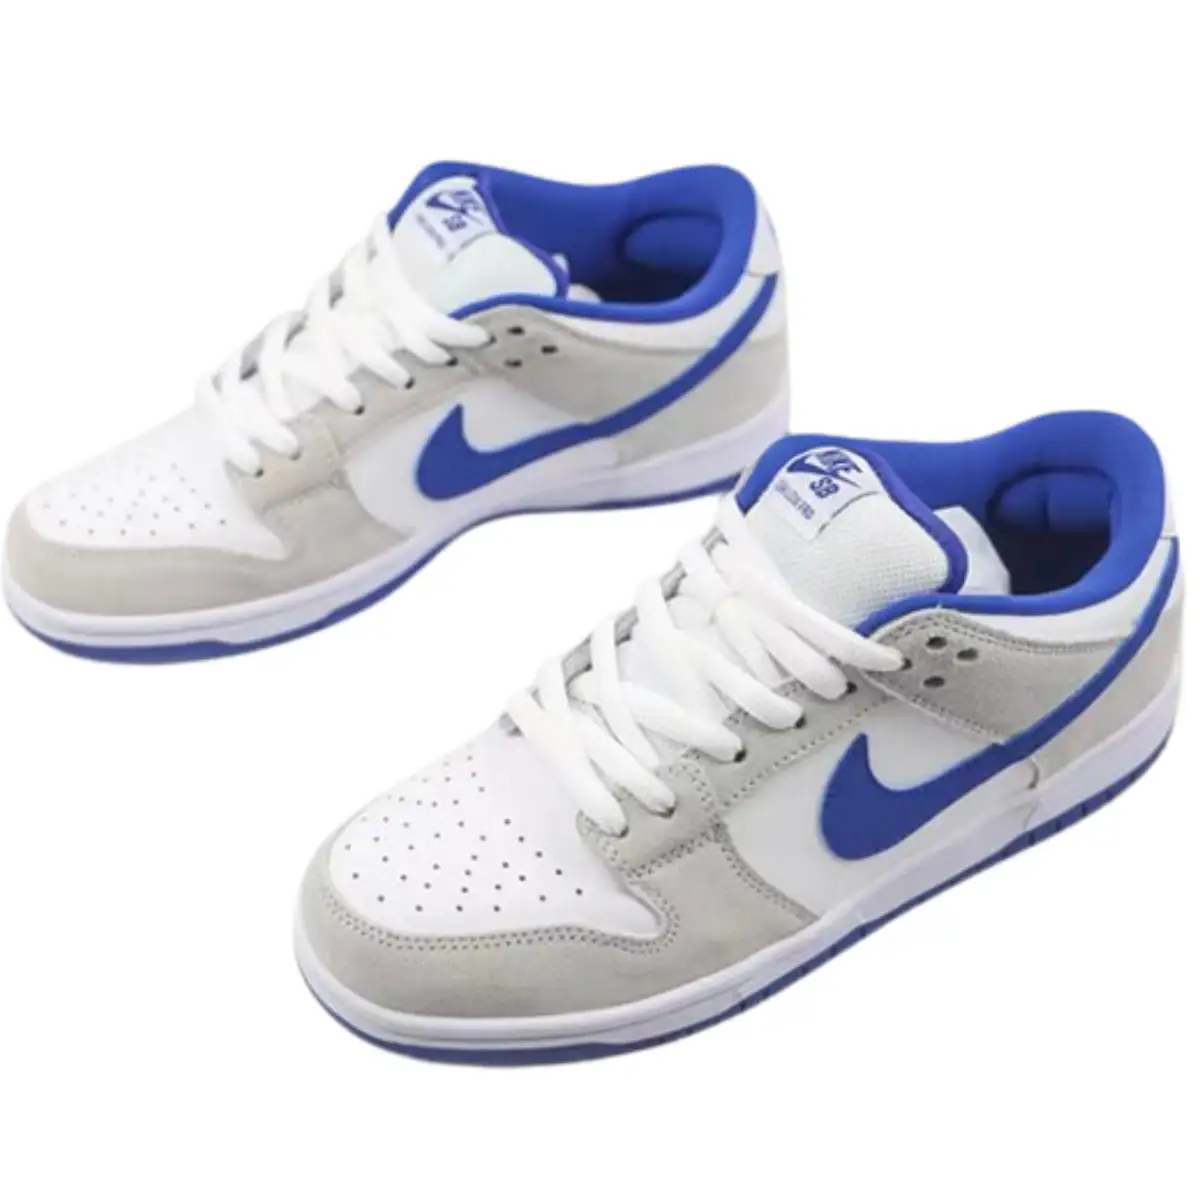 Nike dunk low sneakers dupe dhgate